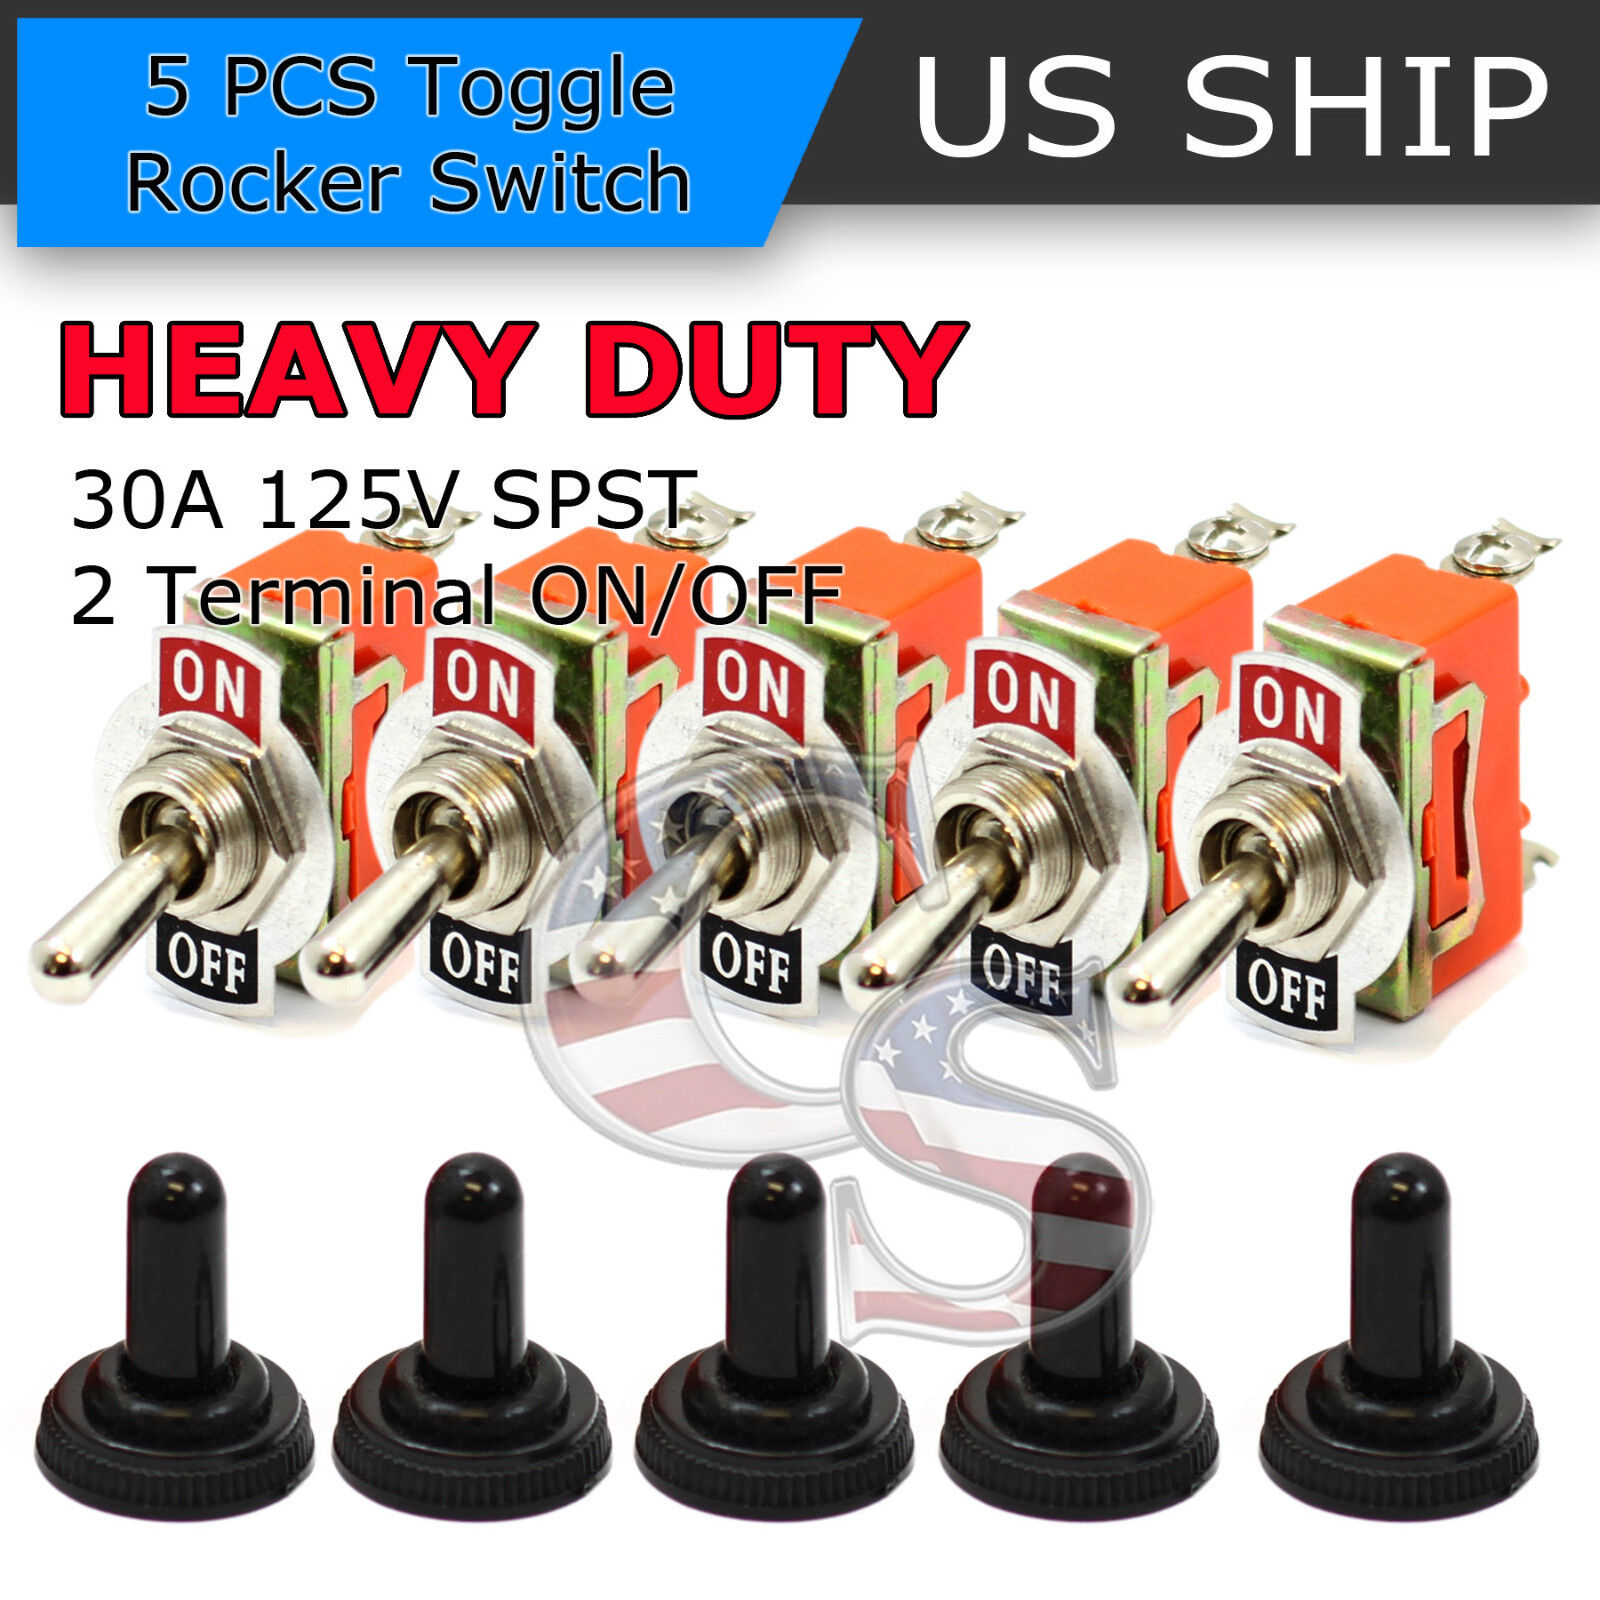 5X Toggle SWITCH ON/OFF Heavy Duty 30A 125V SPDT 2 Terminal Car Boat Waterproof 